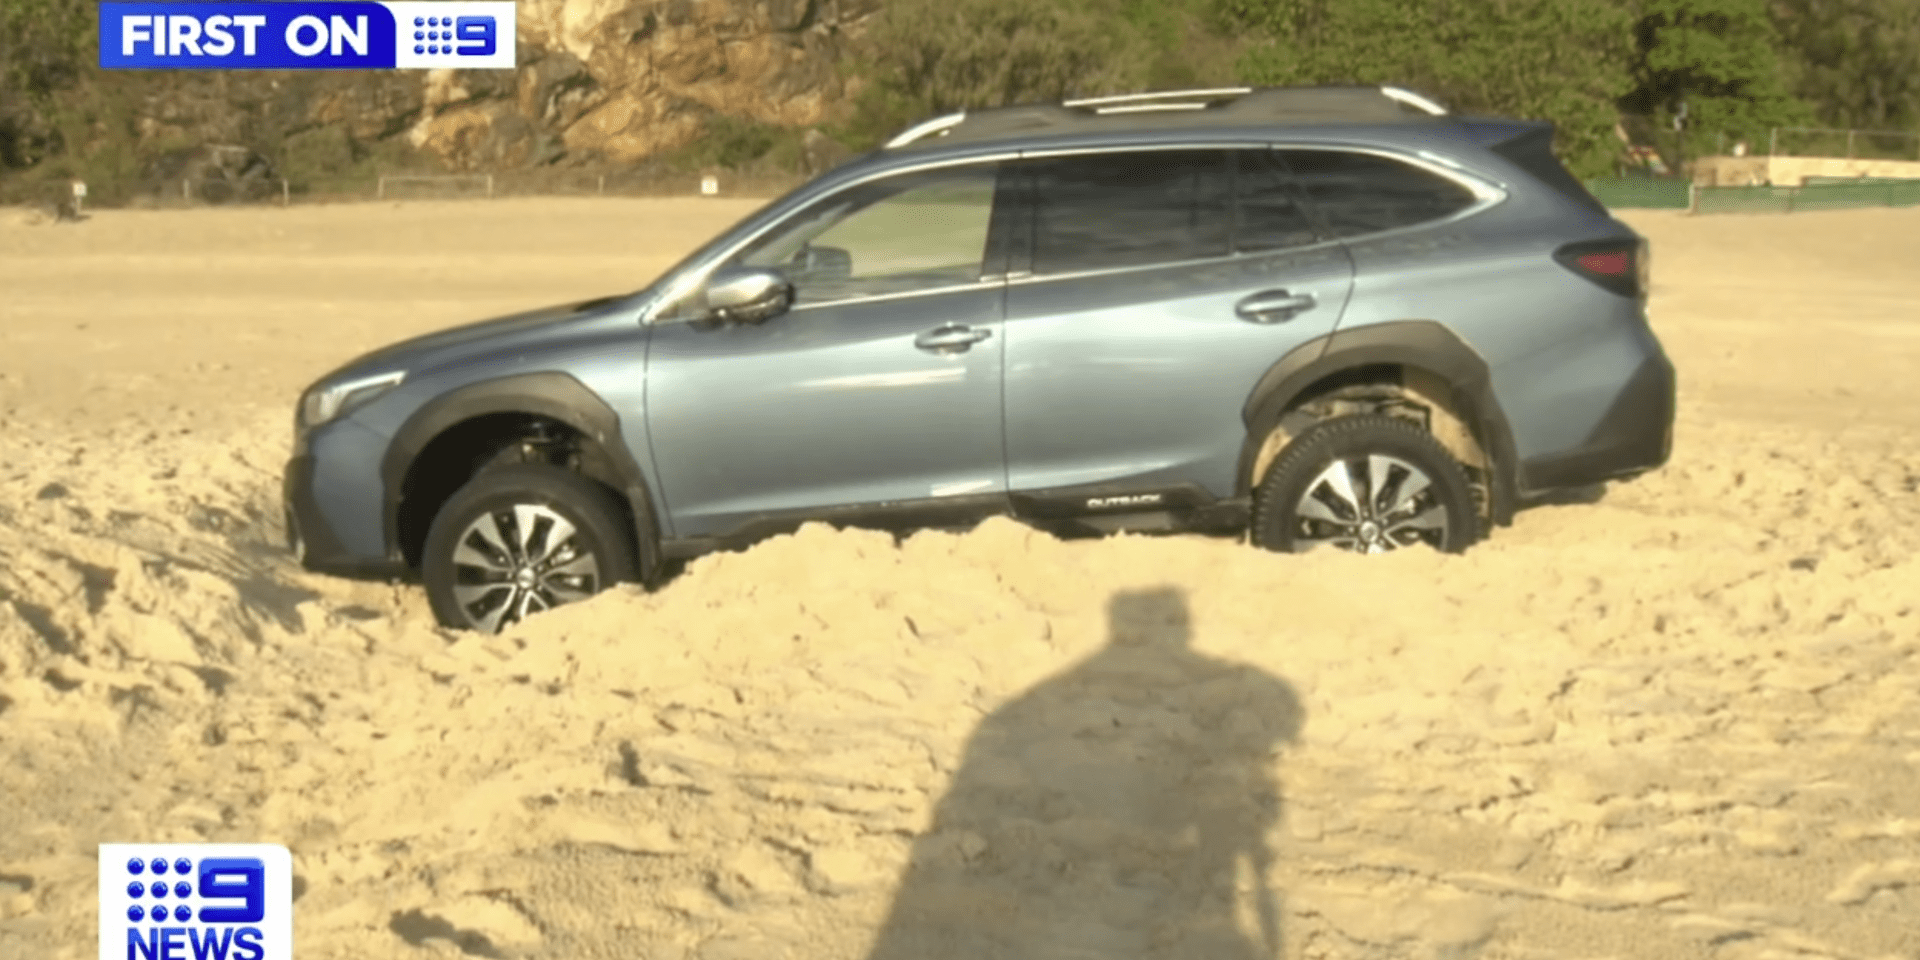 Subaru Outback bogged in sand after driver didn’t realise he was on a beach